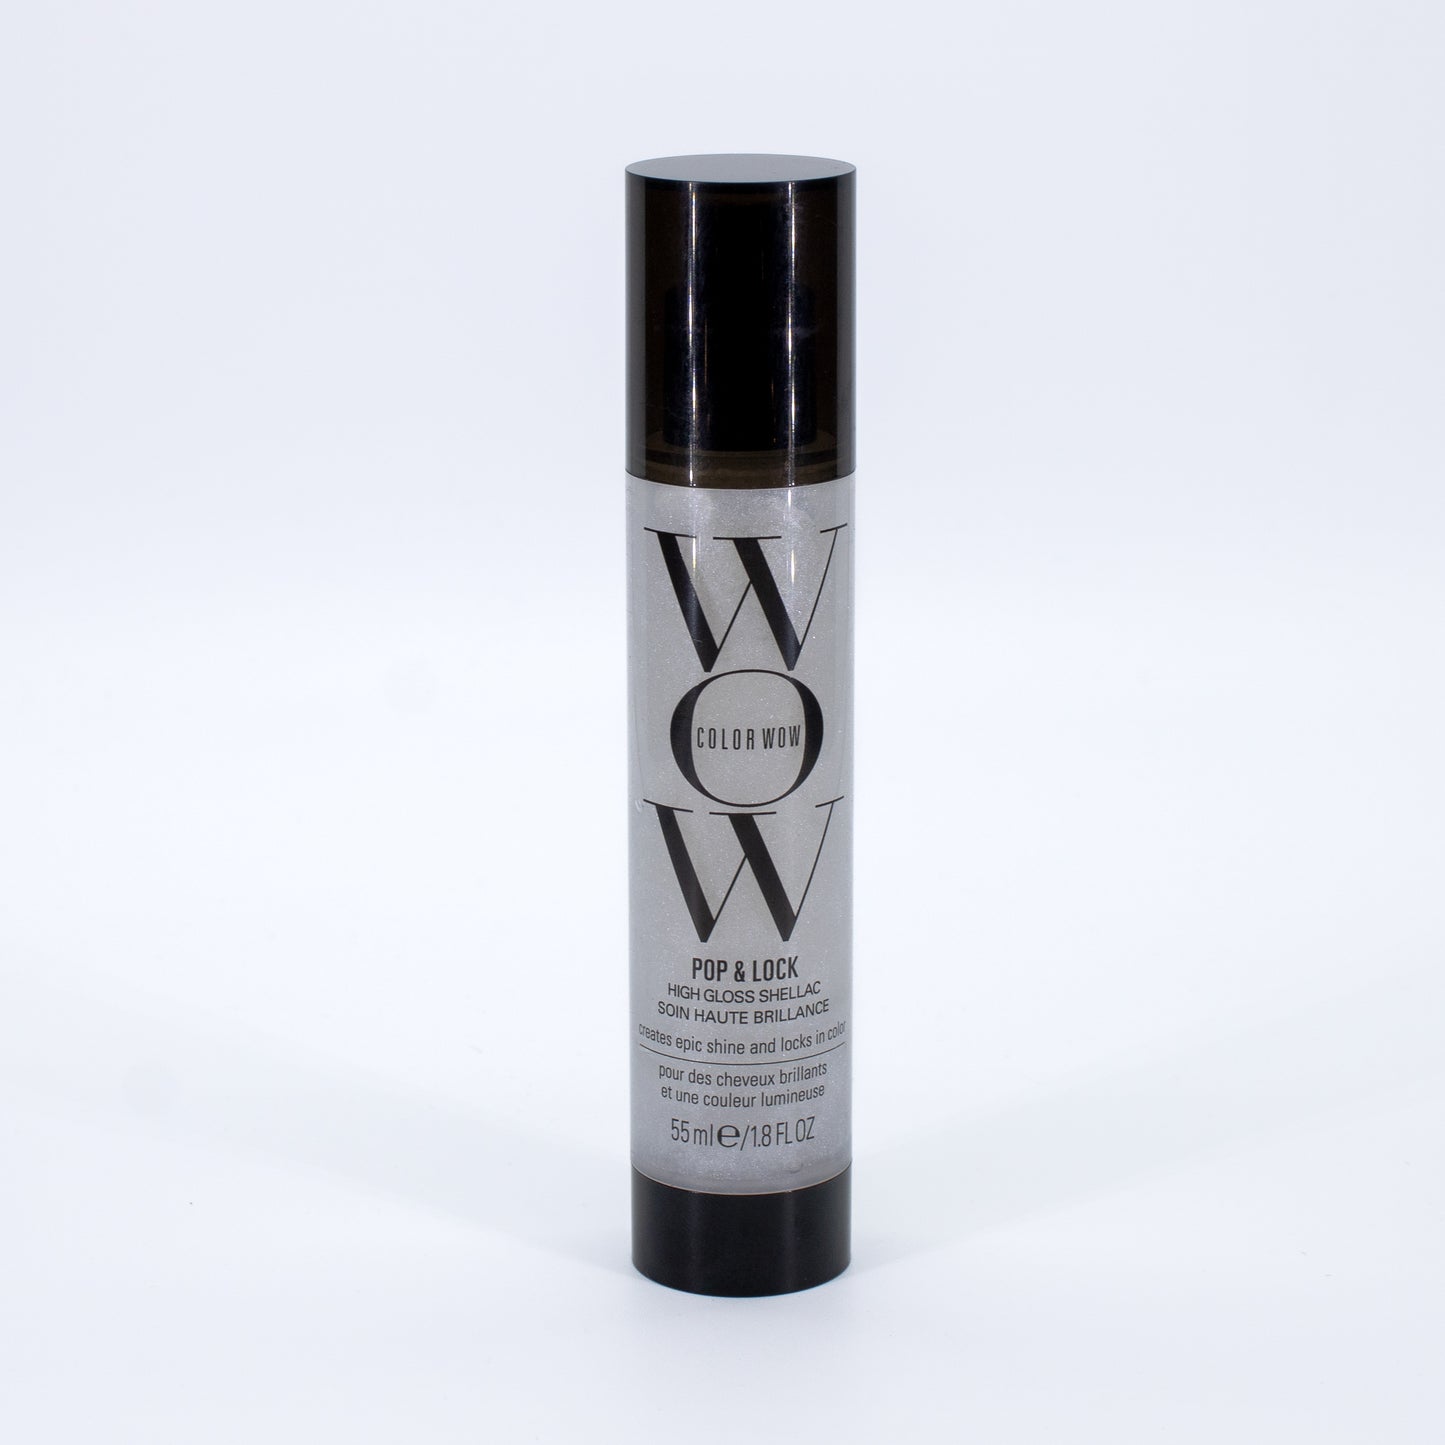 COLOR WOW Pop & Lock High Gloss Shellac 1.8oz - Imperfect Container